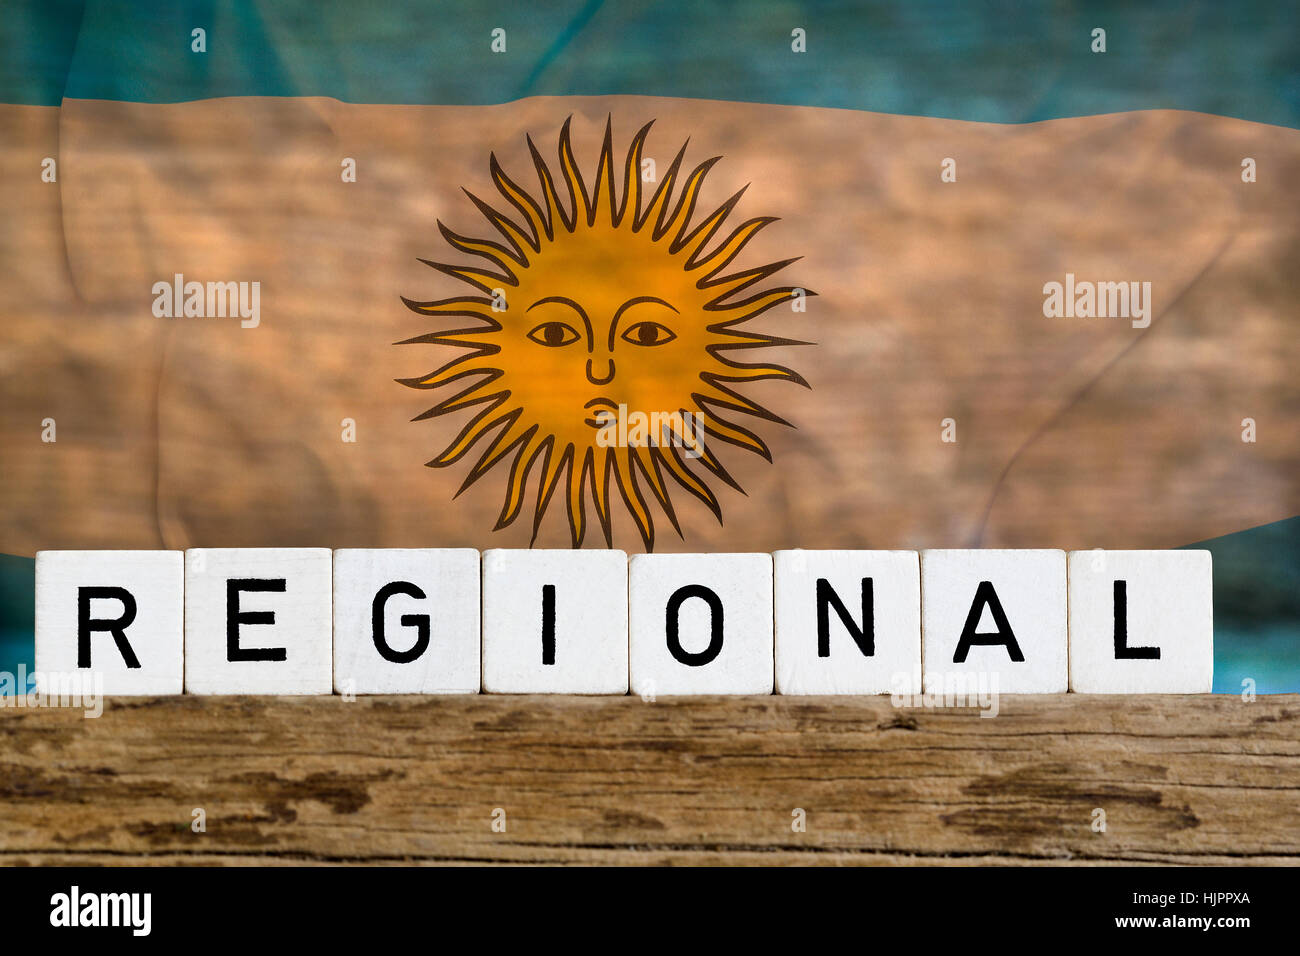 Regional concept, Argentina, on wooden background Stock Photo